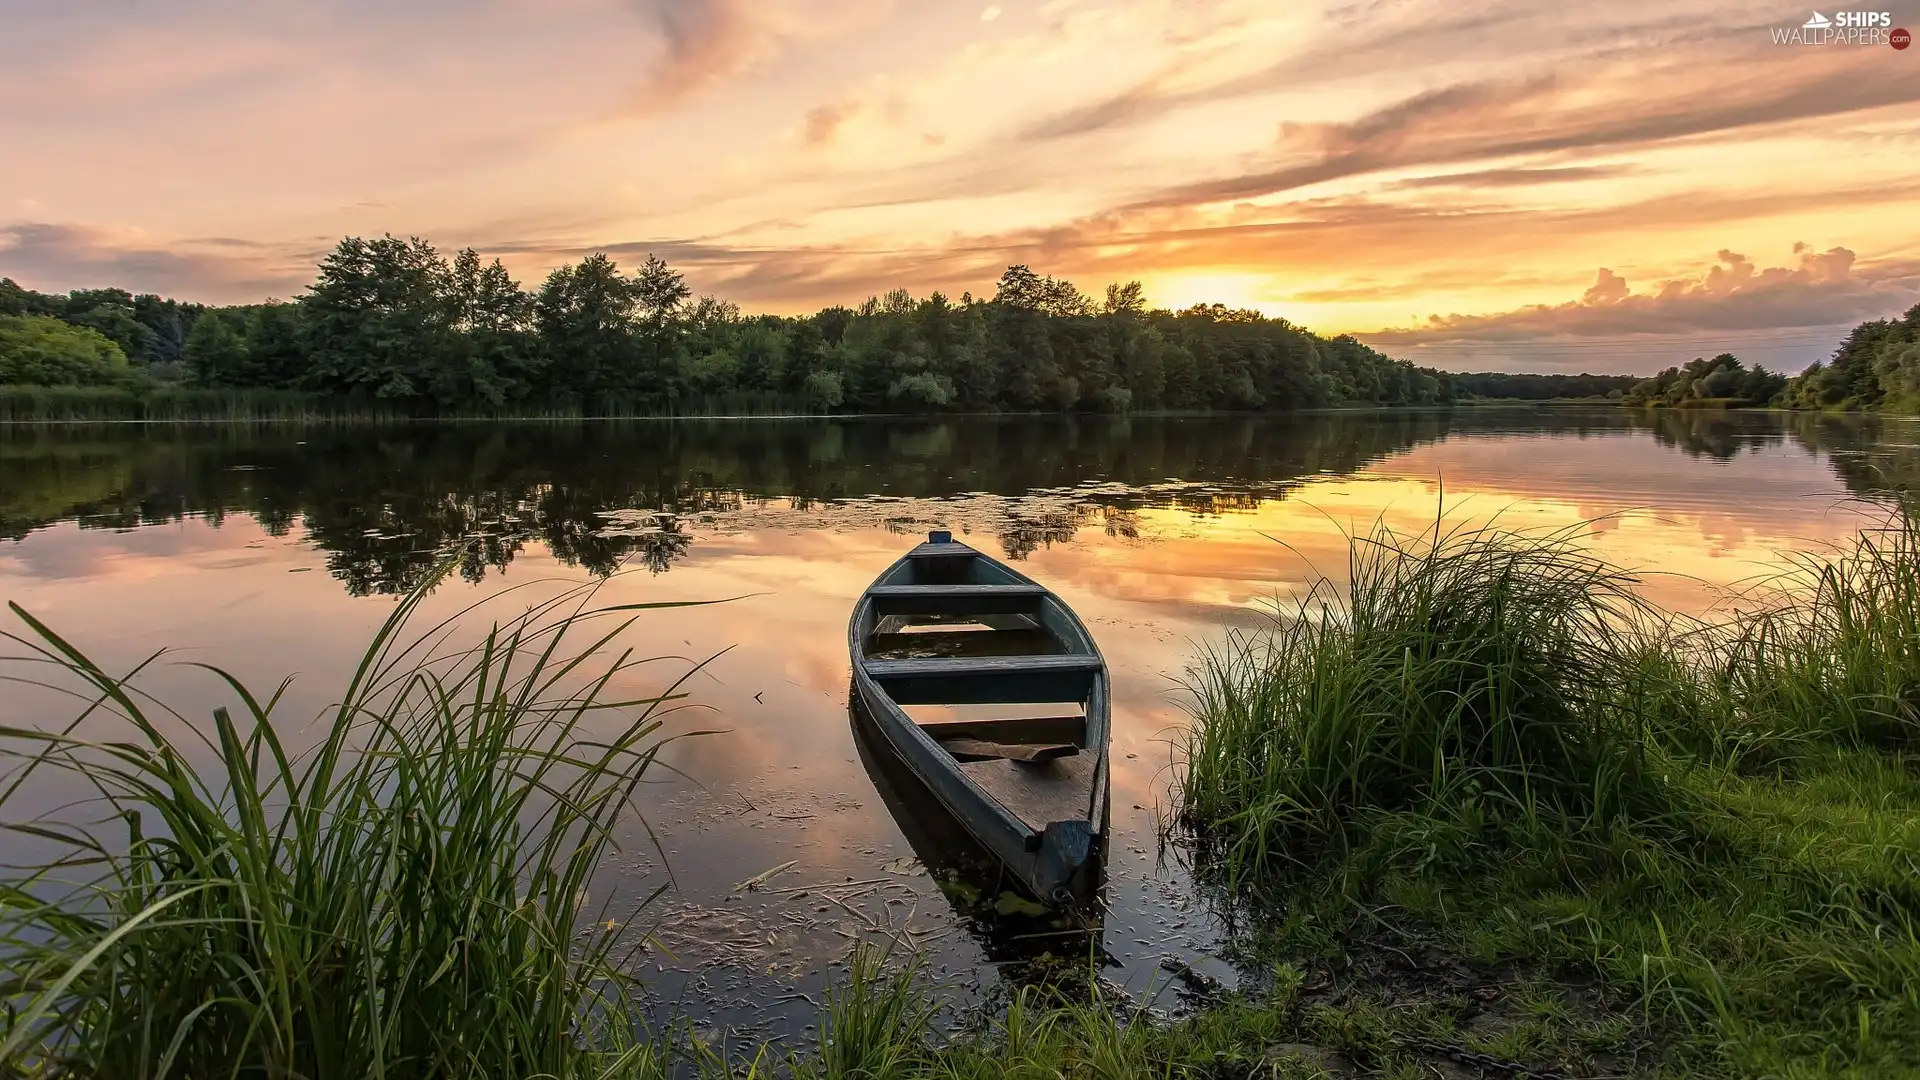 Great Sunsets, River, trees, viewes, grass, Boat